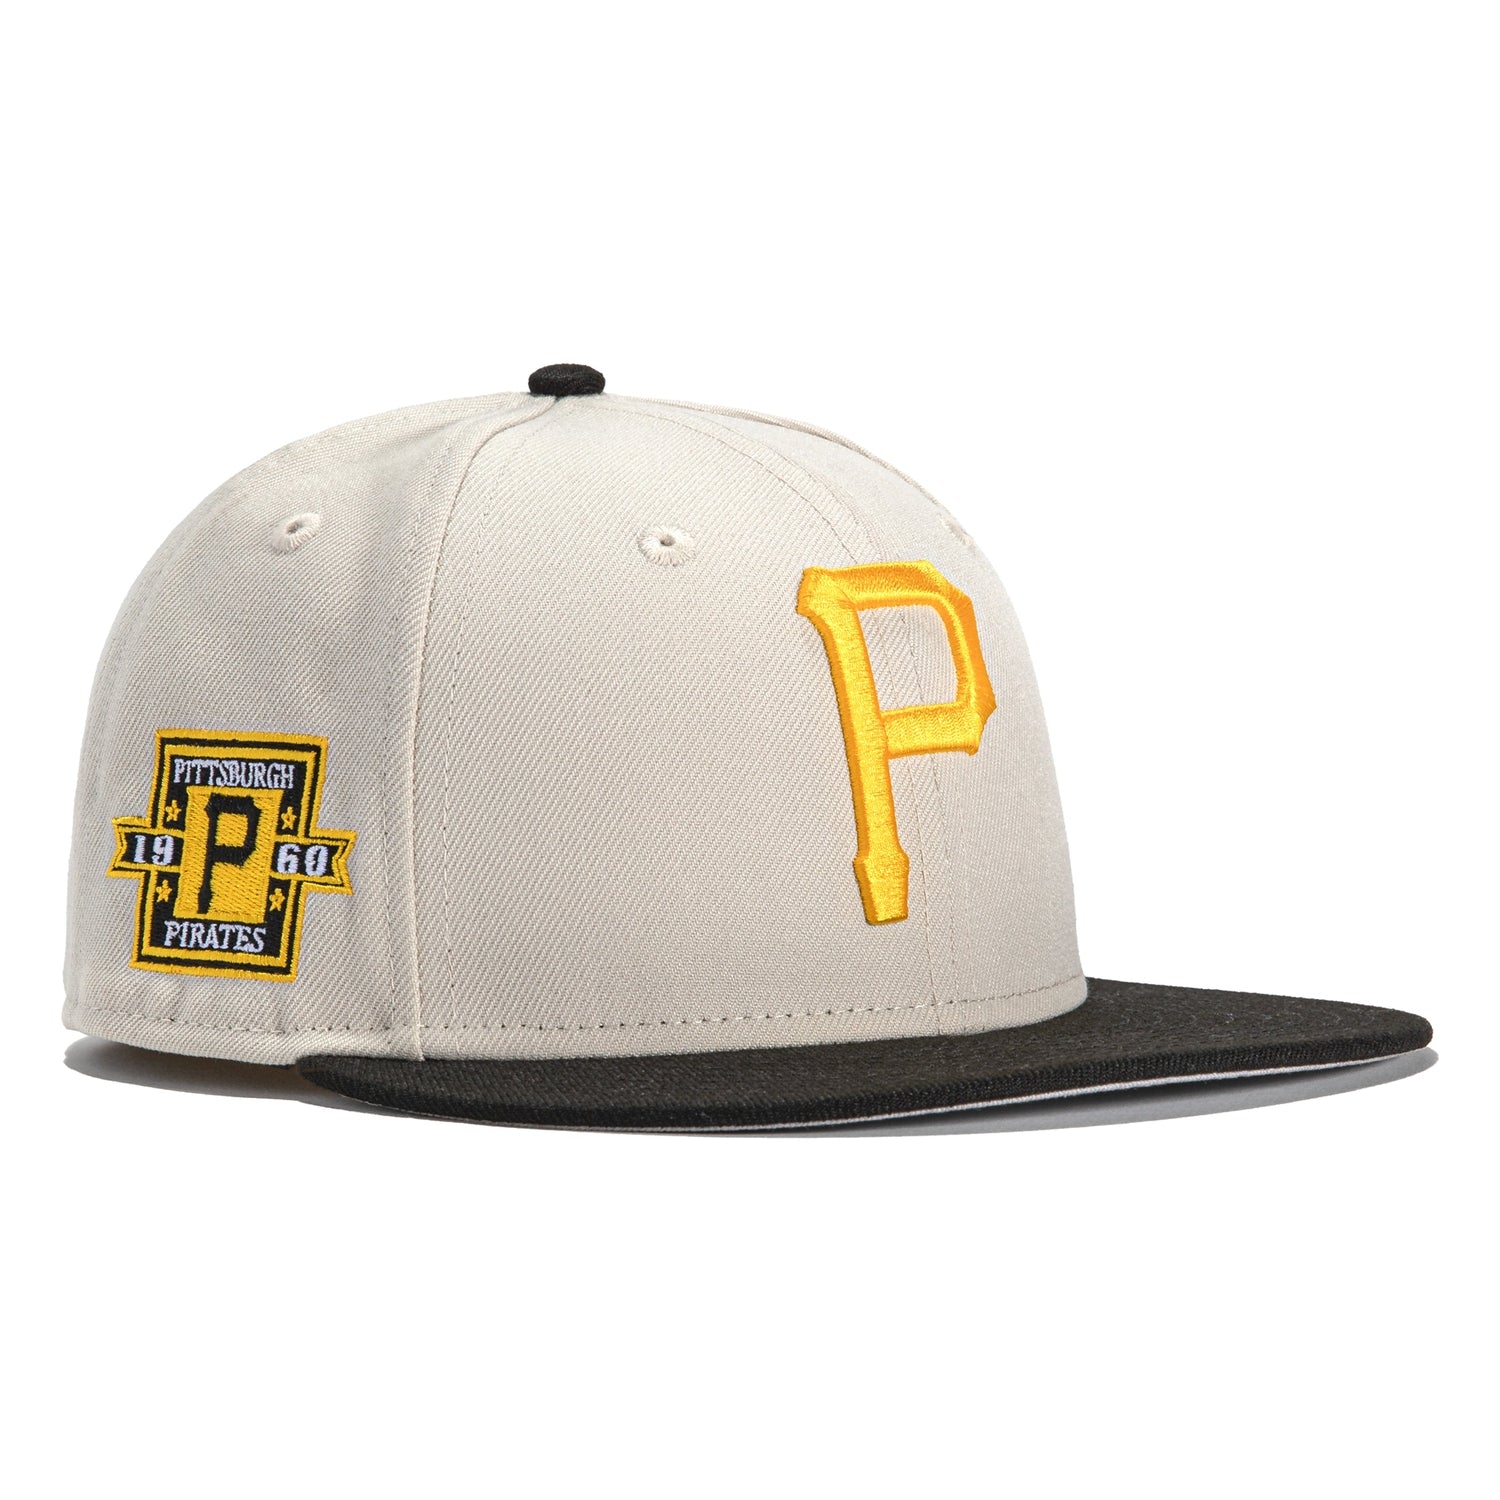 Exclusive New Era Pittsburgh Pirates Fitted Hat MLB Club Size 7 1/2 2tone  Tan